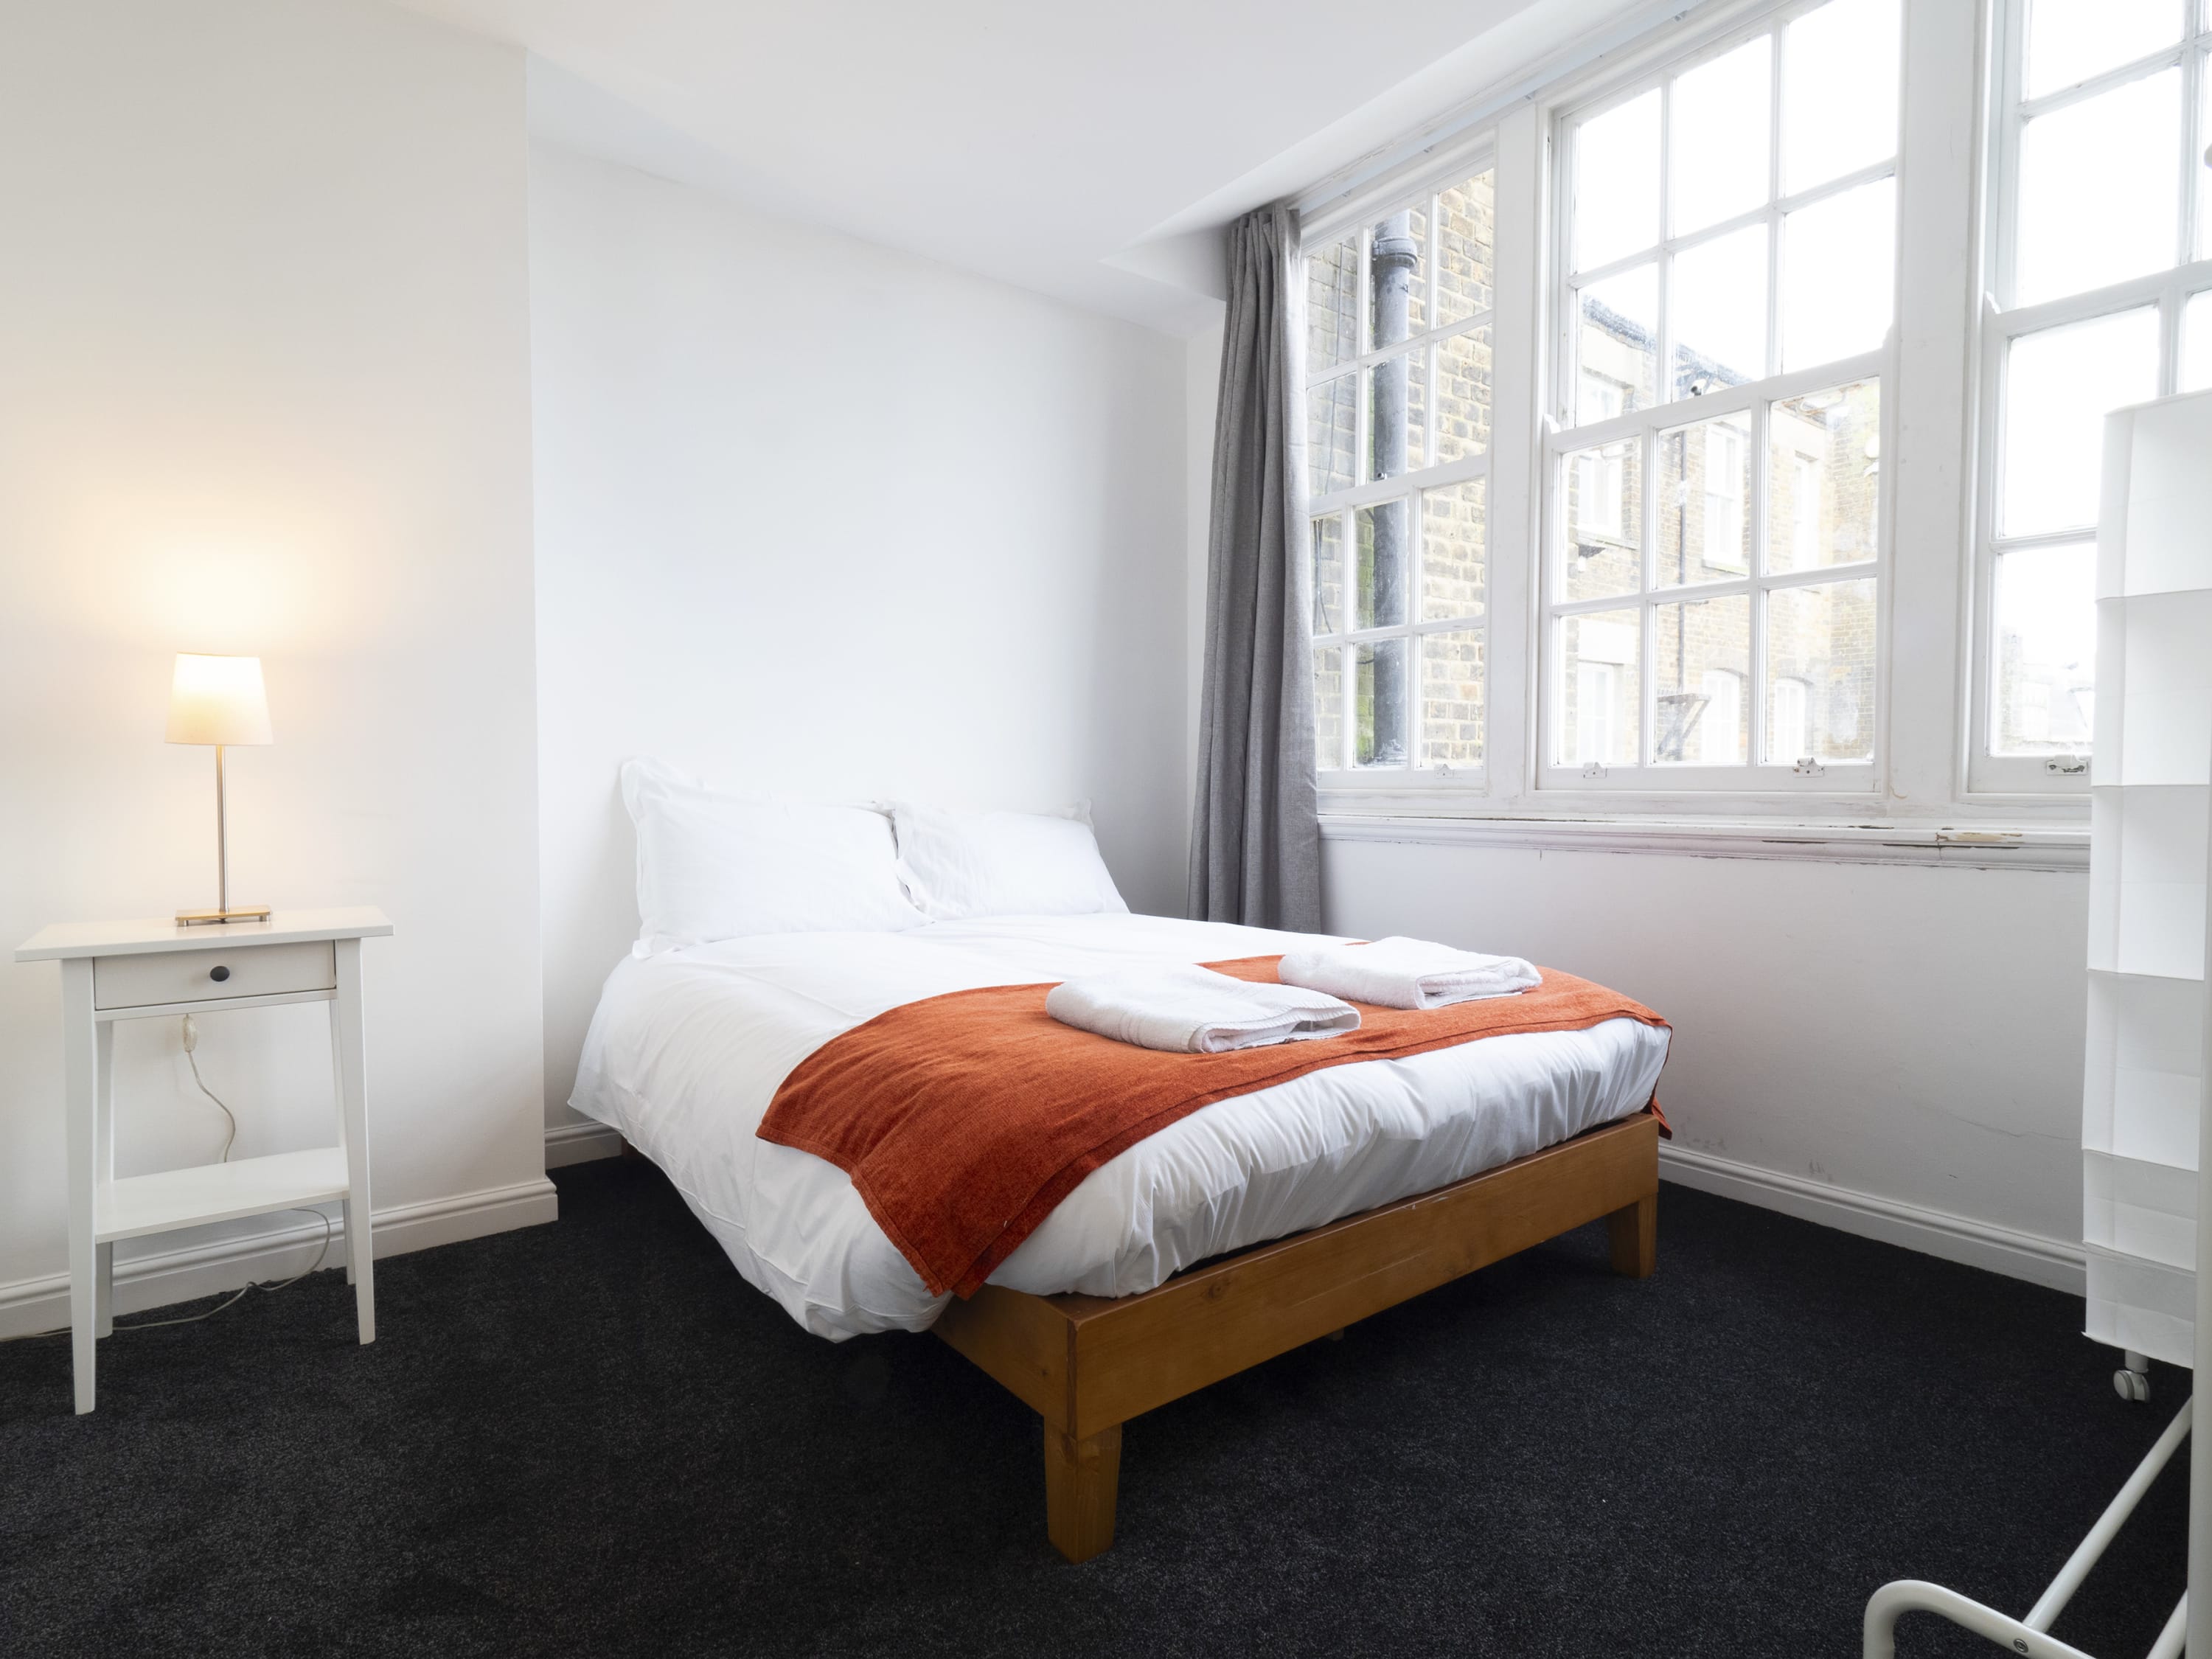 Property Image 1 - The Old Post Office - Refurbished Spacious Apartment near Margate Old Town